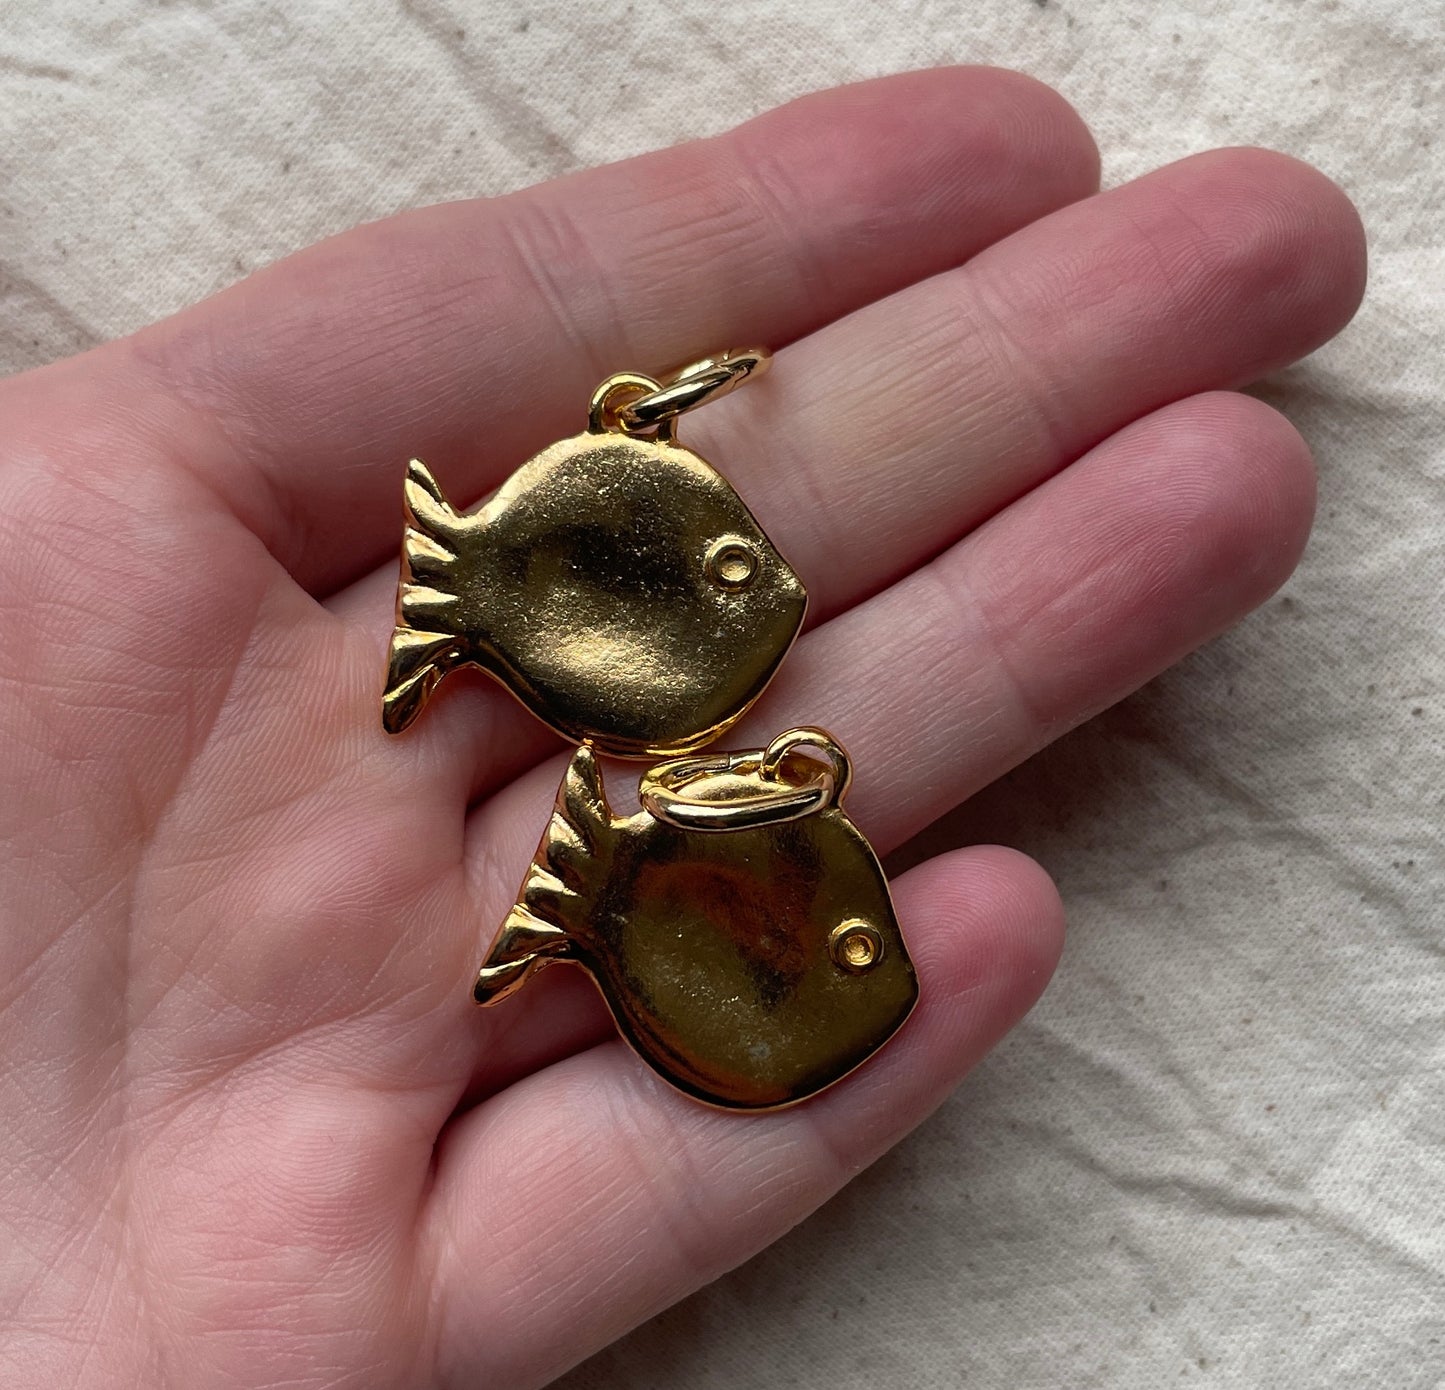 Charms - Vintage - Guppy Fish